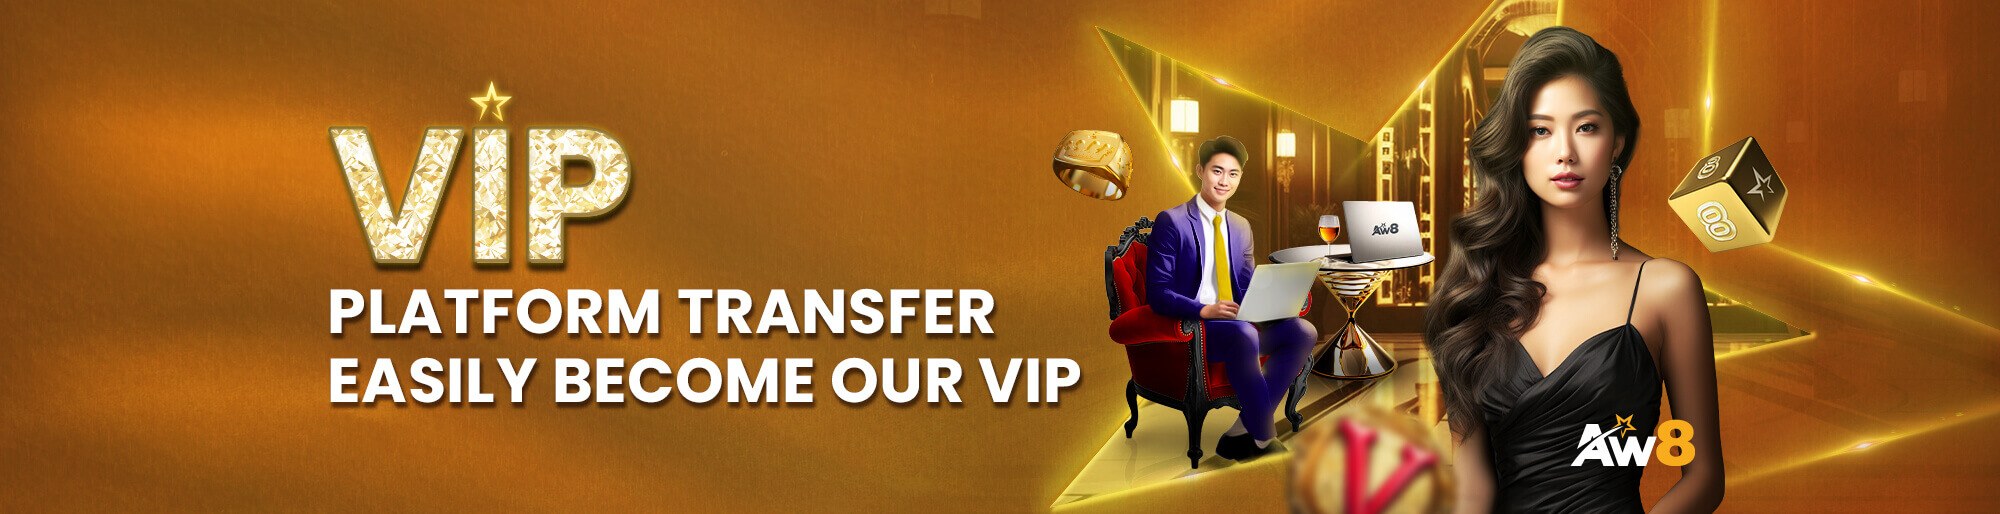 Aw8_2000 x 514_VIP_PLATFORM TRANSFER_EASILY BECOME OUR VIP_New2